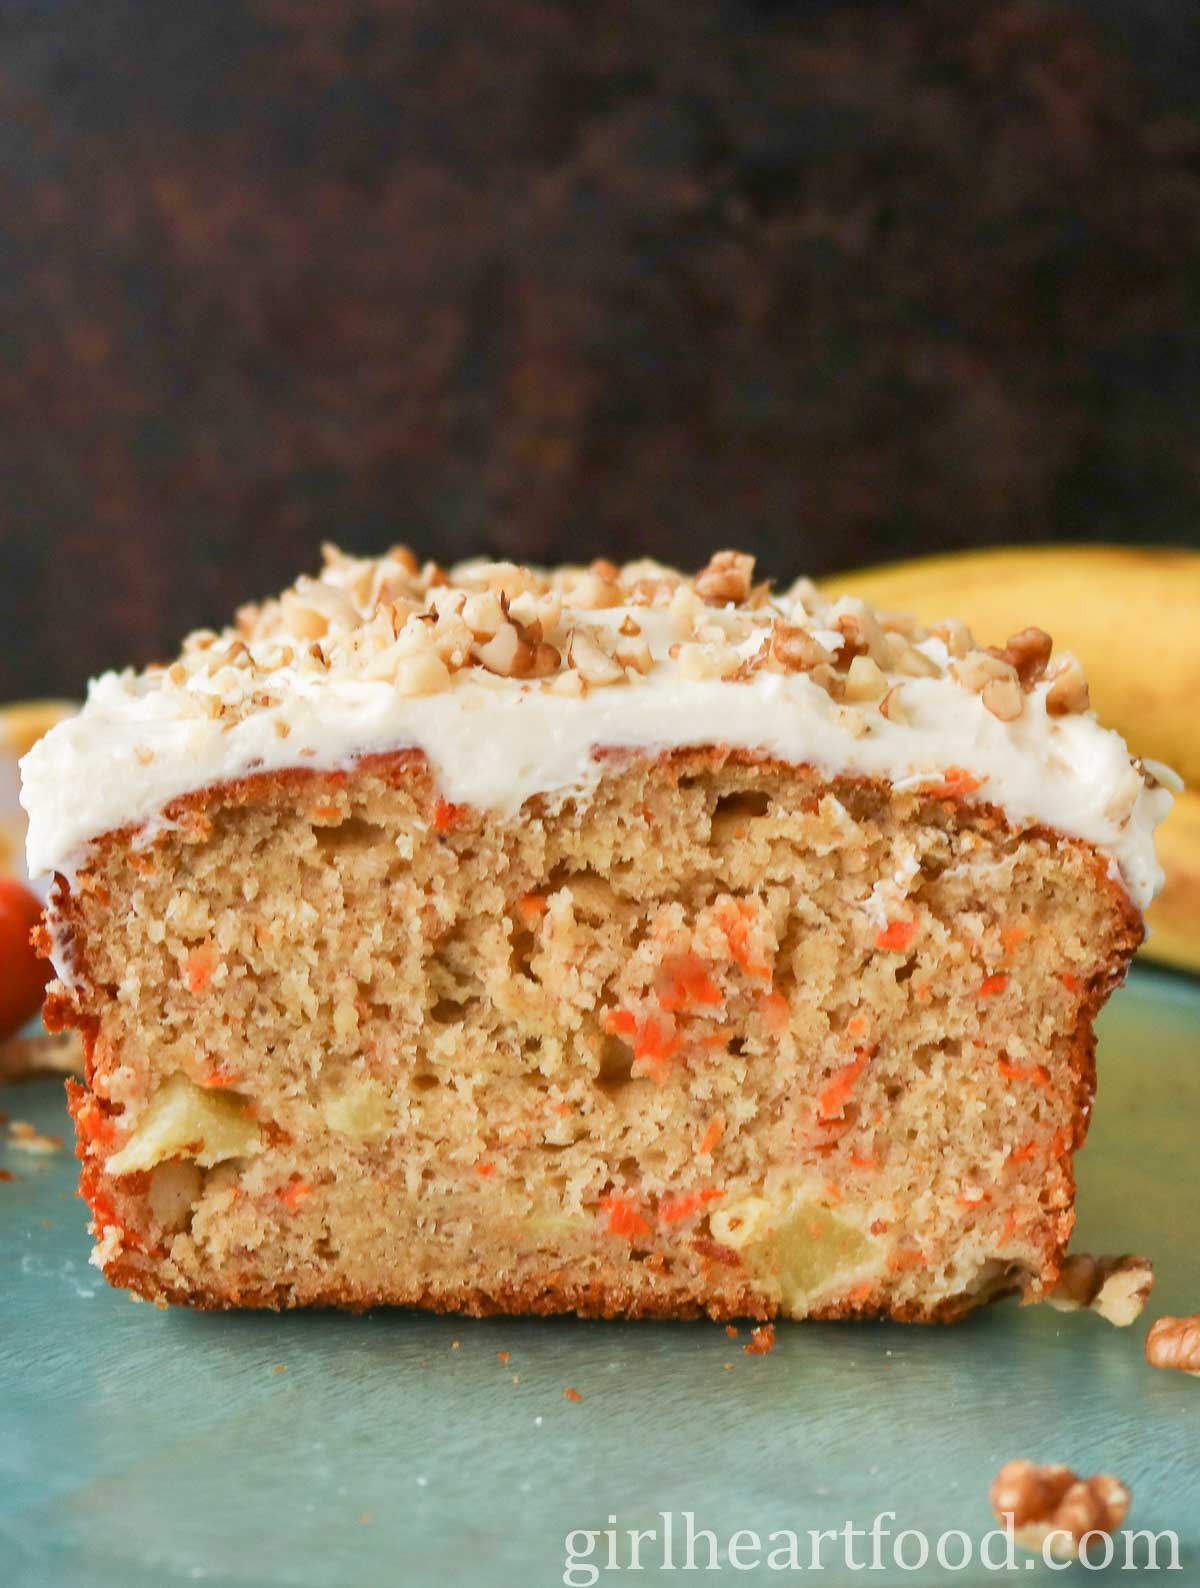 Cut loaf of frosted carrot cake banana bread, showing the interior texture.